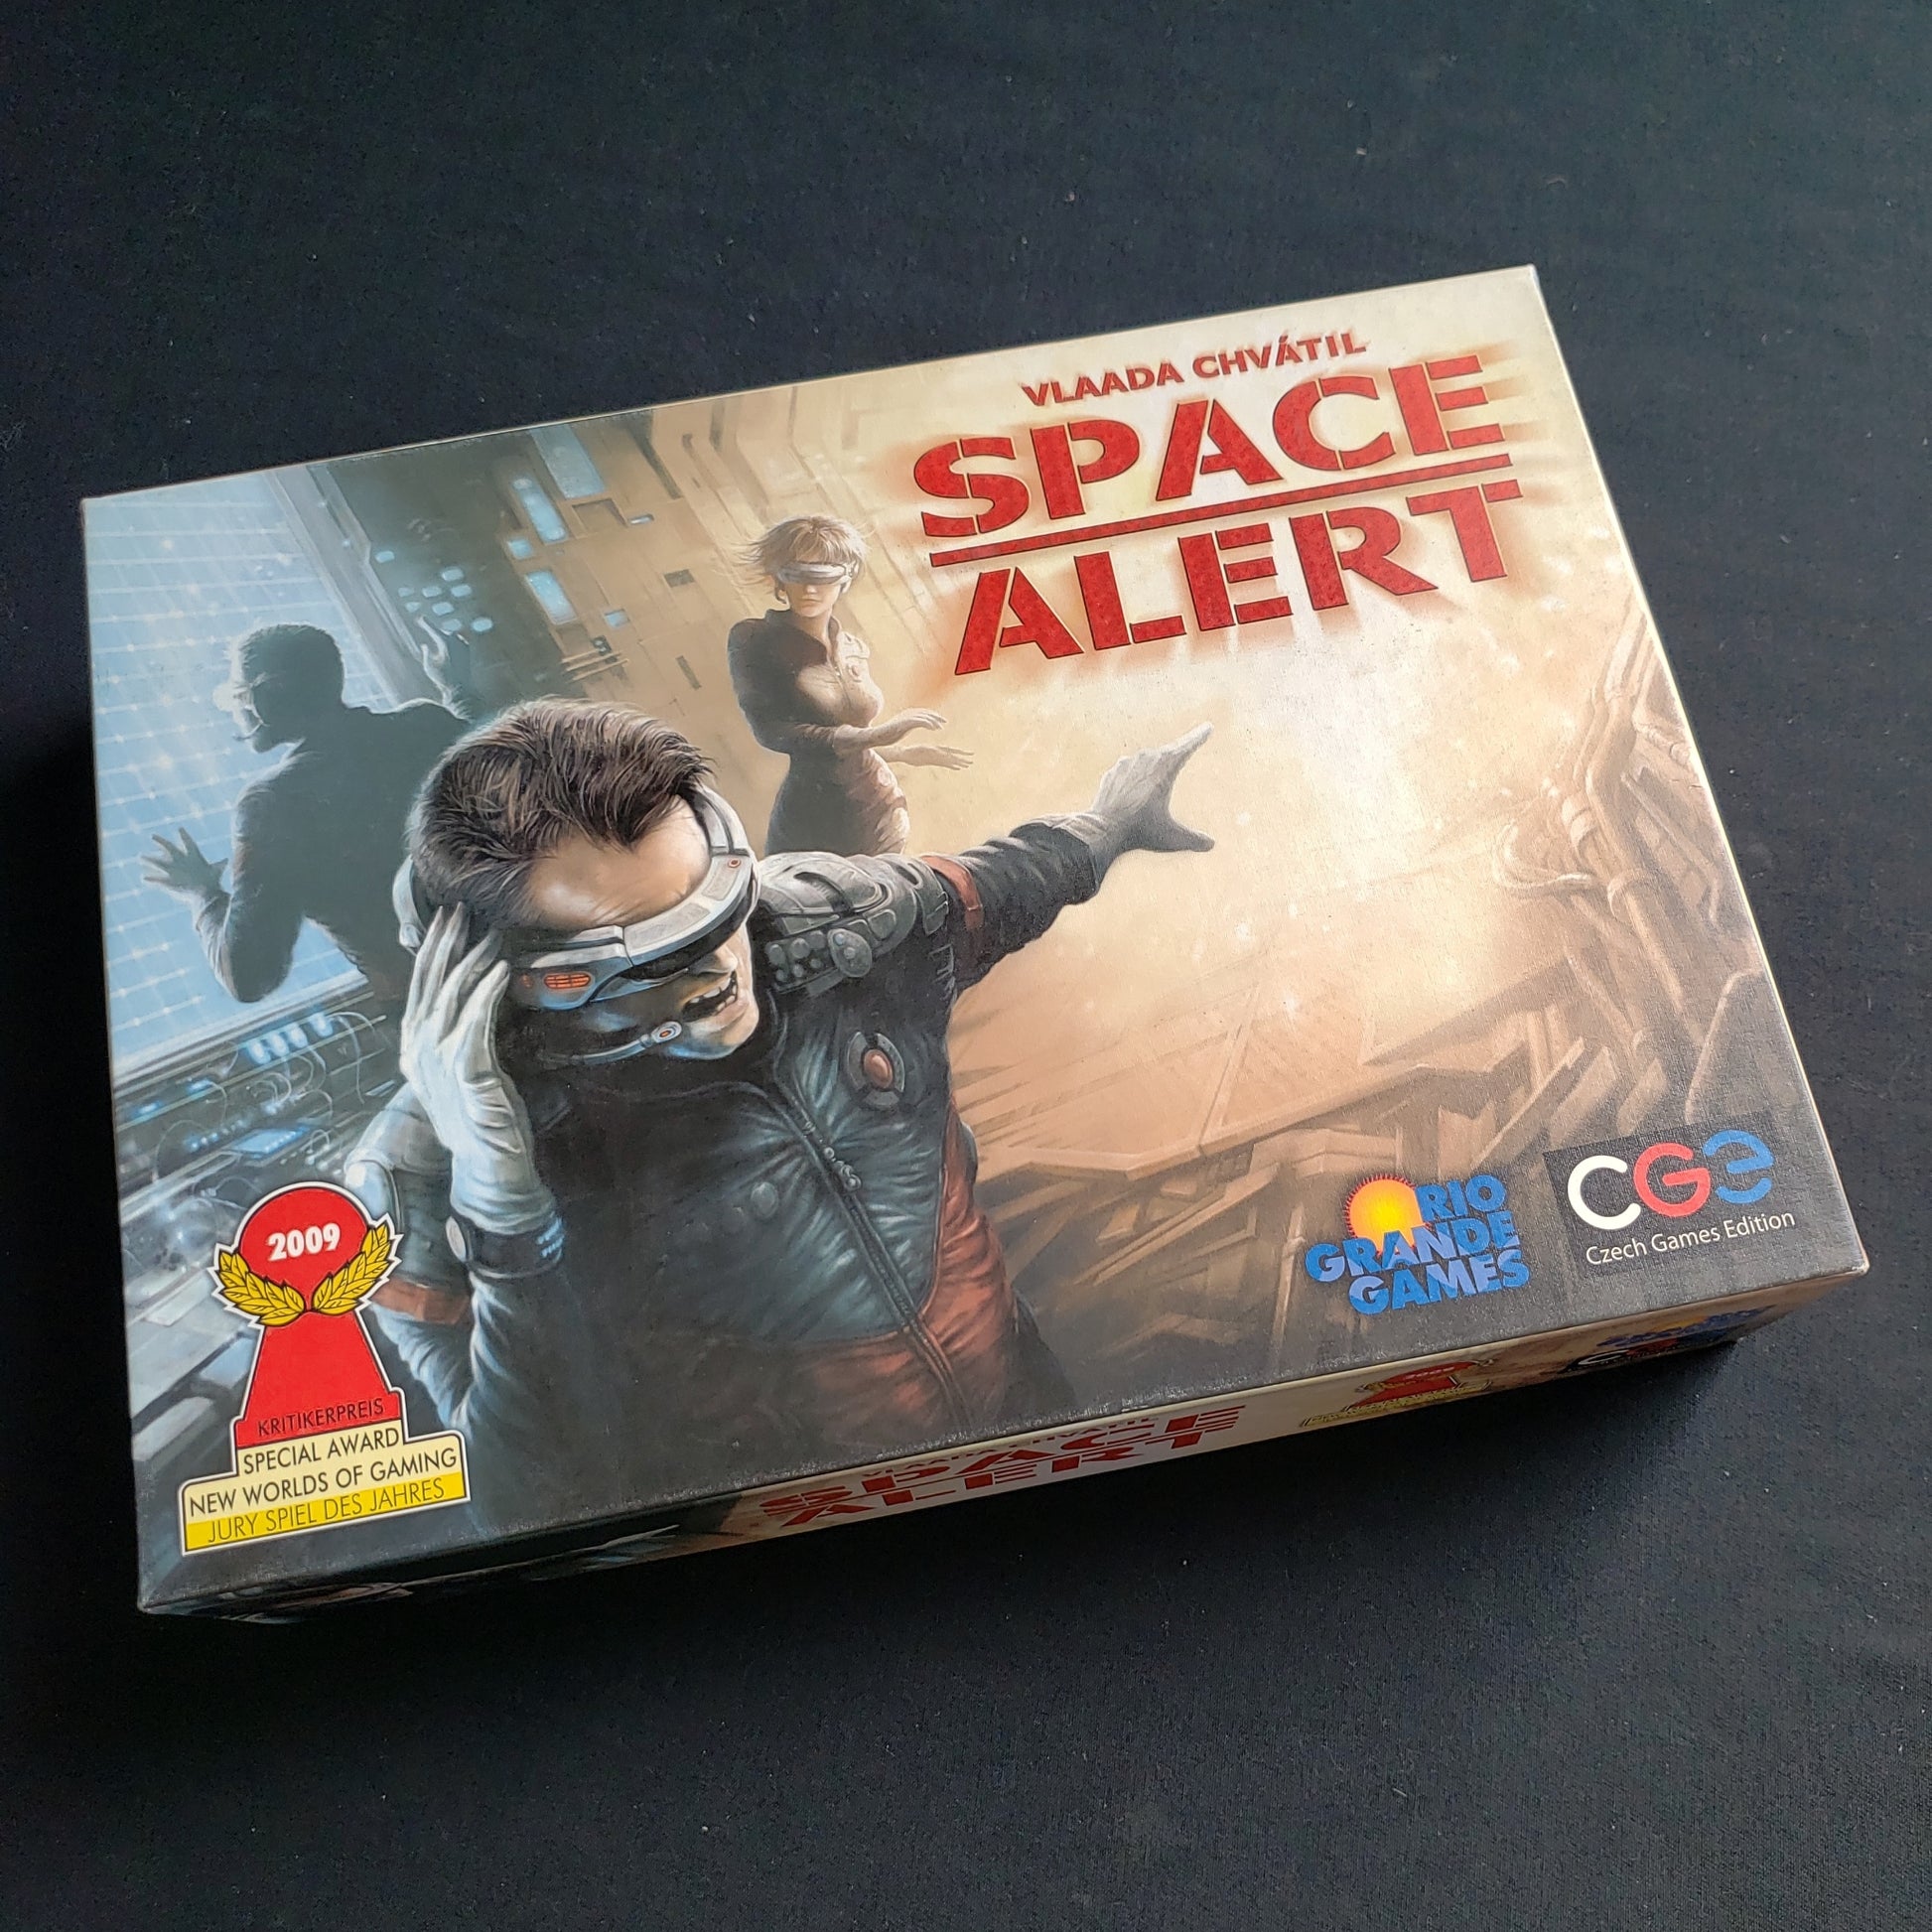 Image shows the front cover of the box of the Space Alert board game